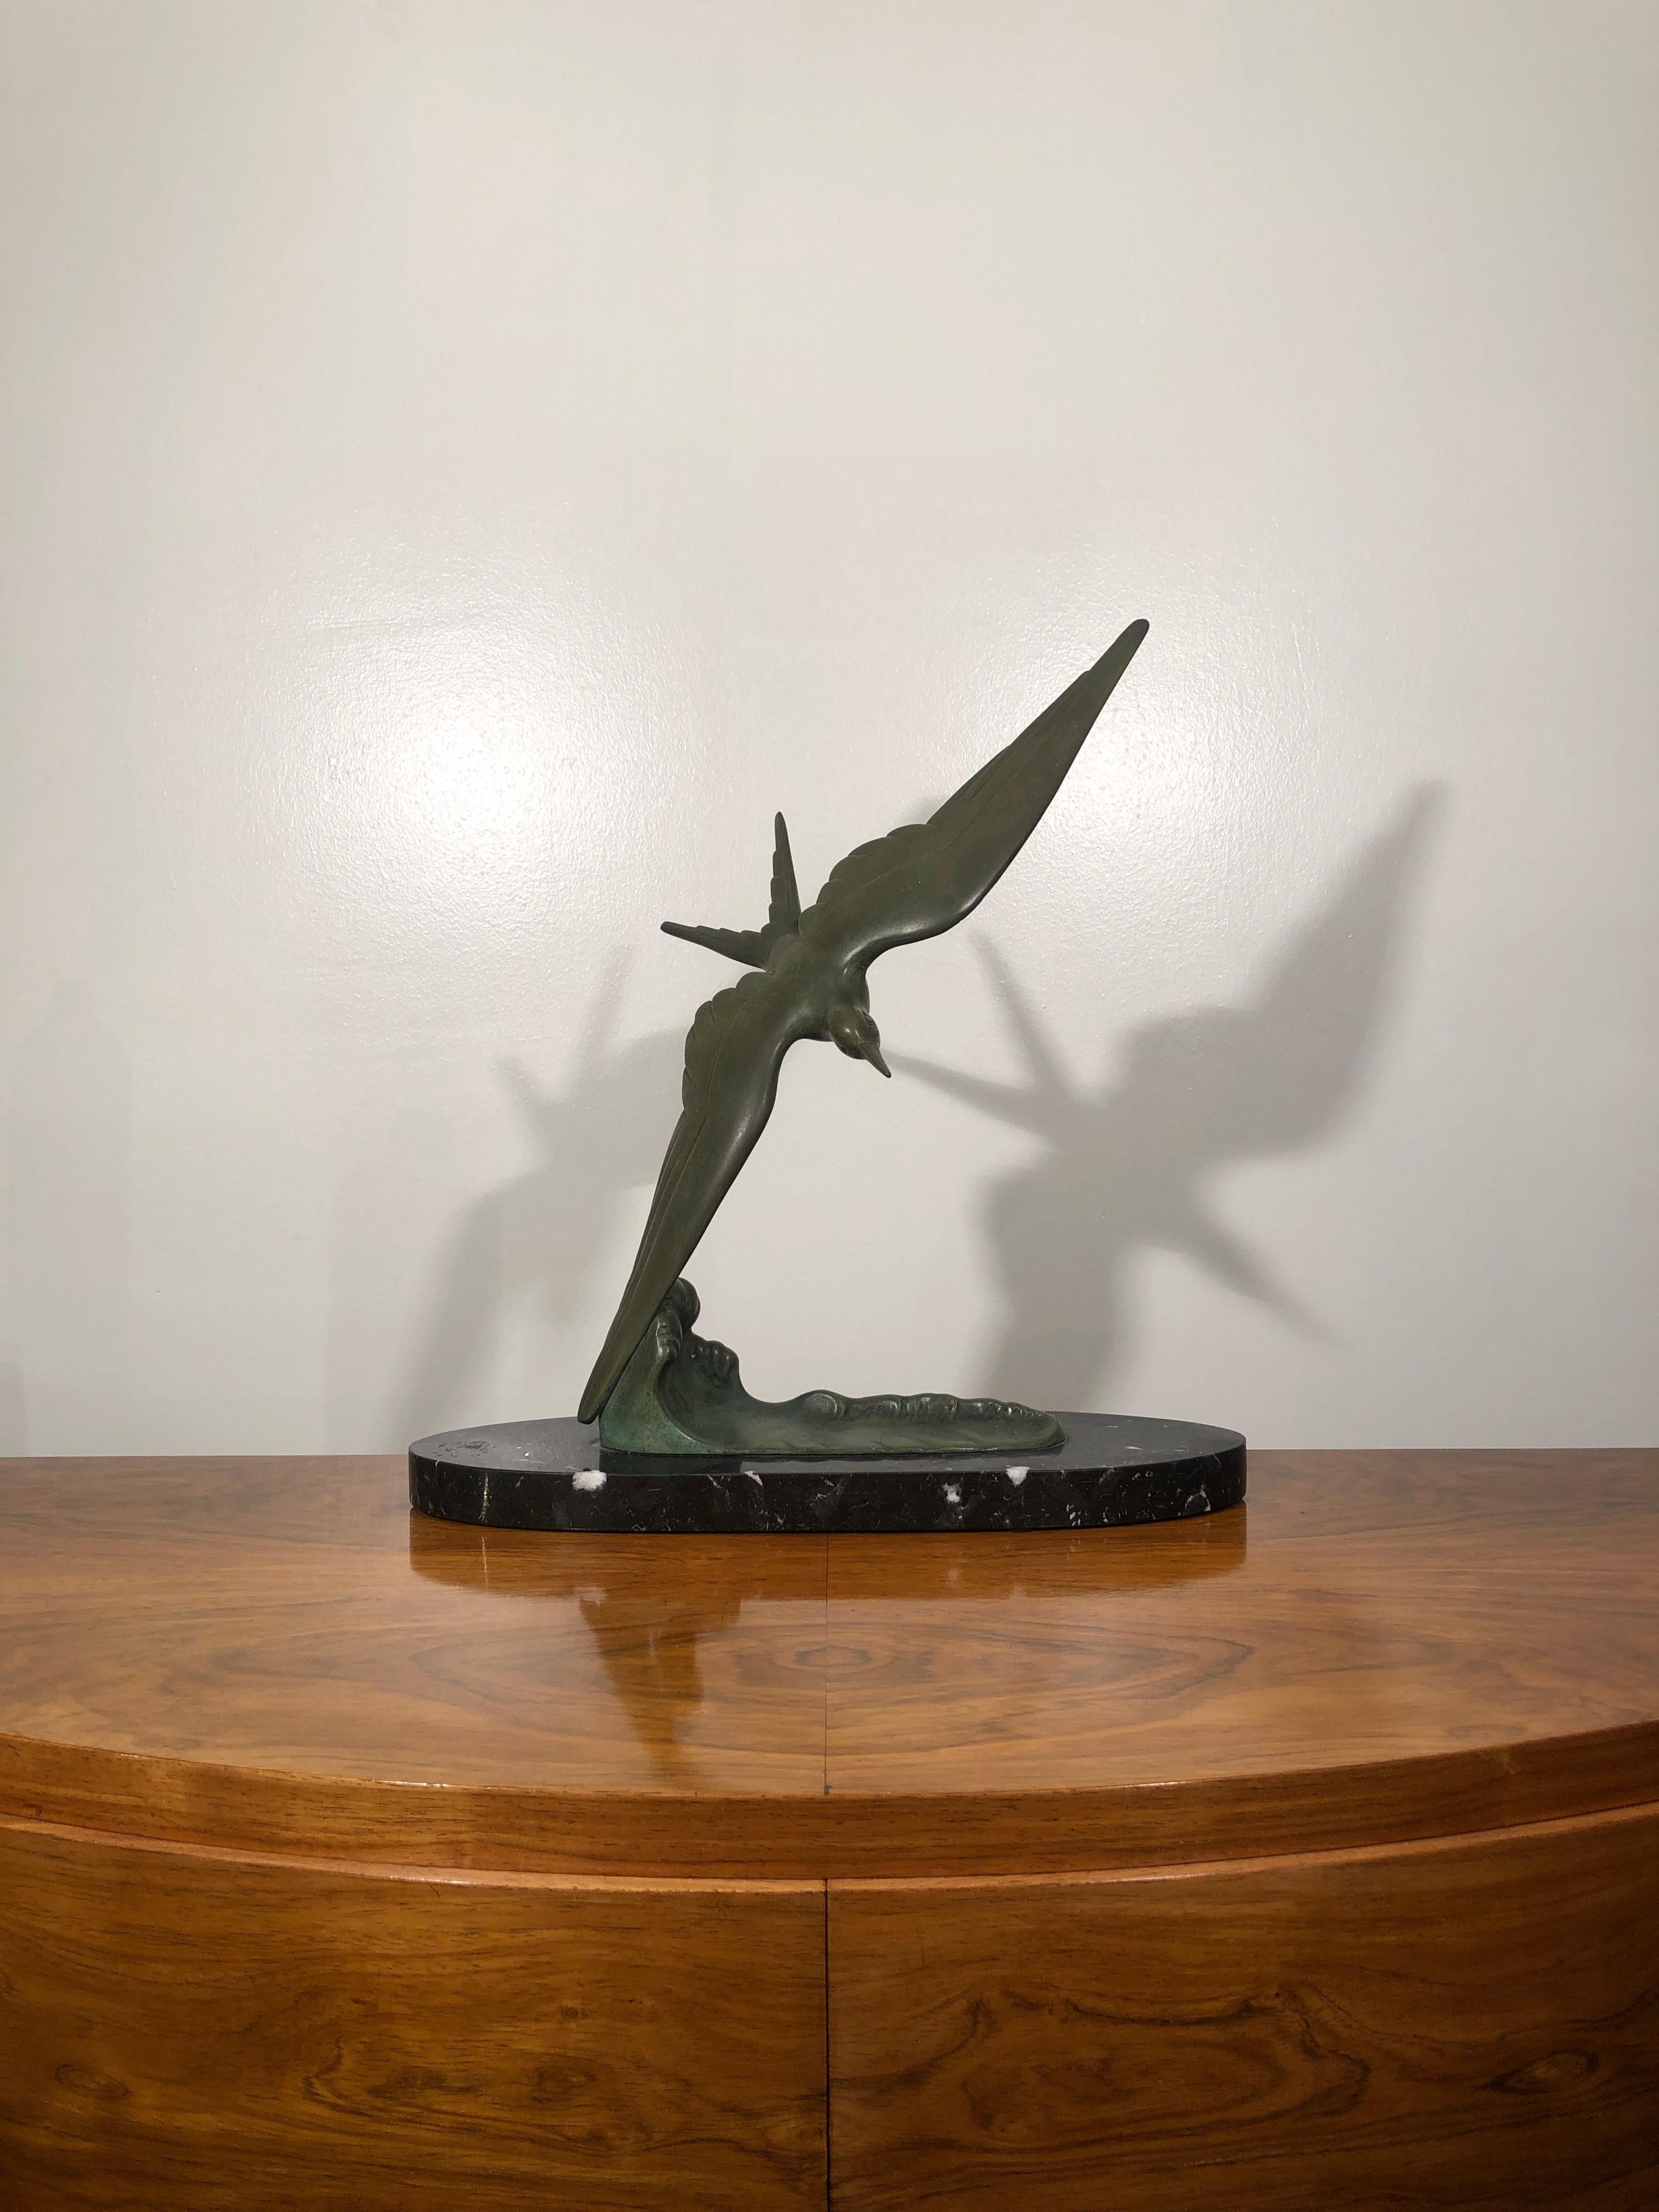 Art Deco animal bird shaped bronze sculpture on marble base, signed Secondo.

Secondo was a French Artist active in the first part of 20th century. 

The animal body is separated from the base, the wing end fits the metal base. The sculpture is